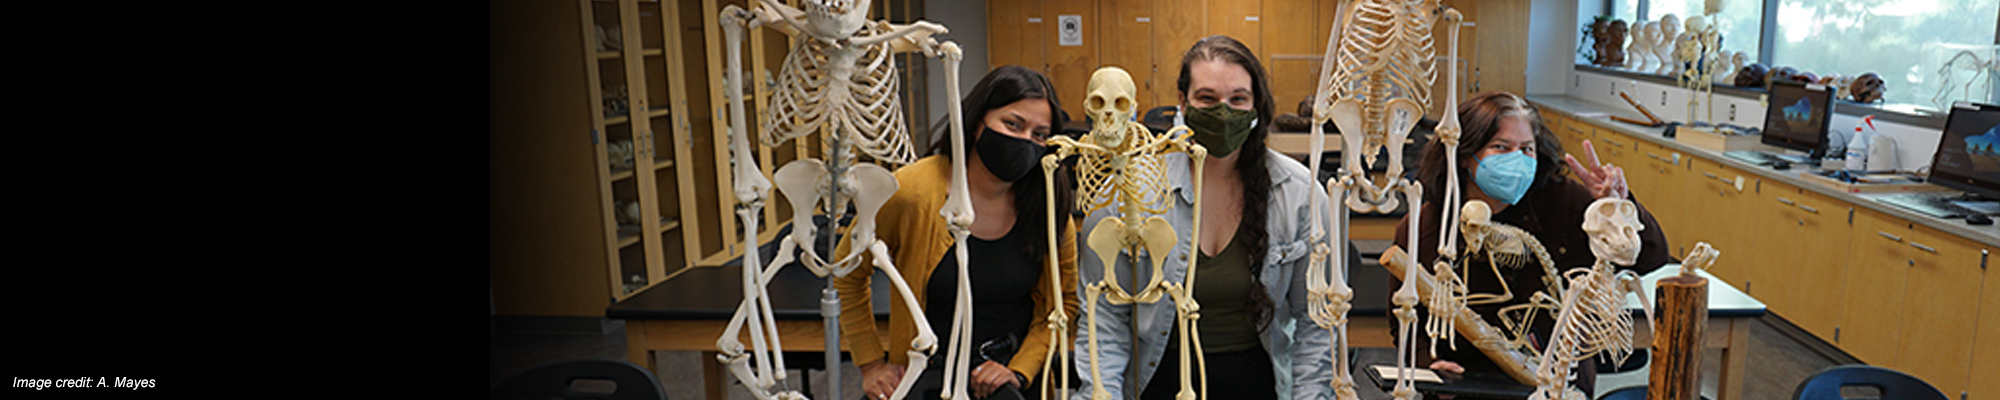 students and faculty in bio anthropology lab with skeletons